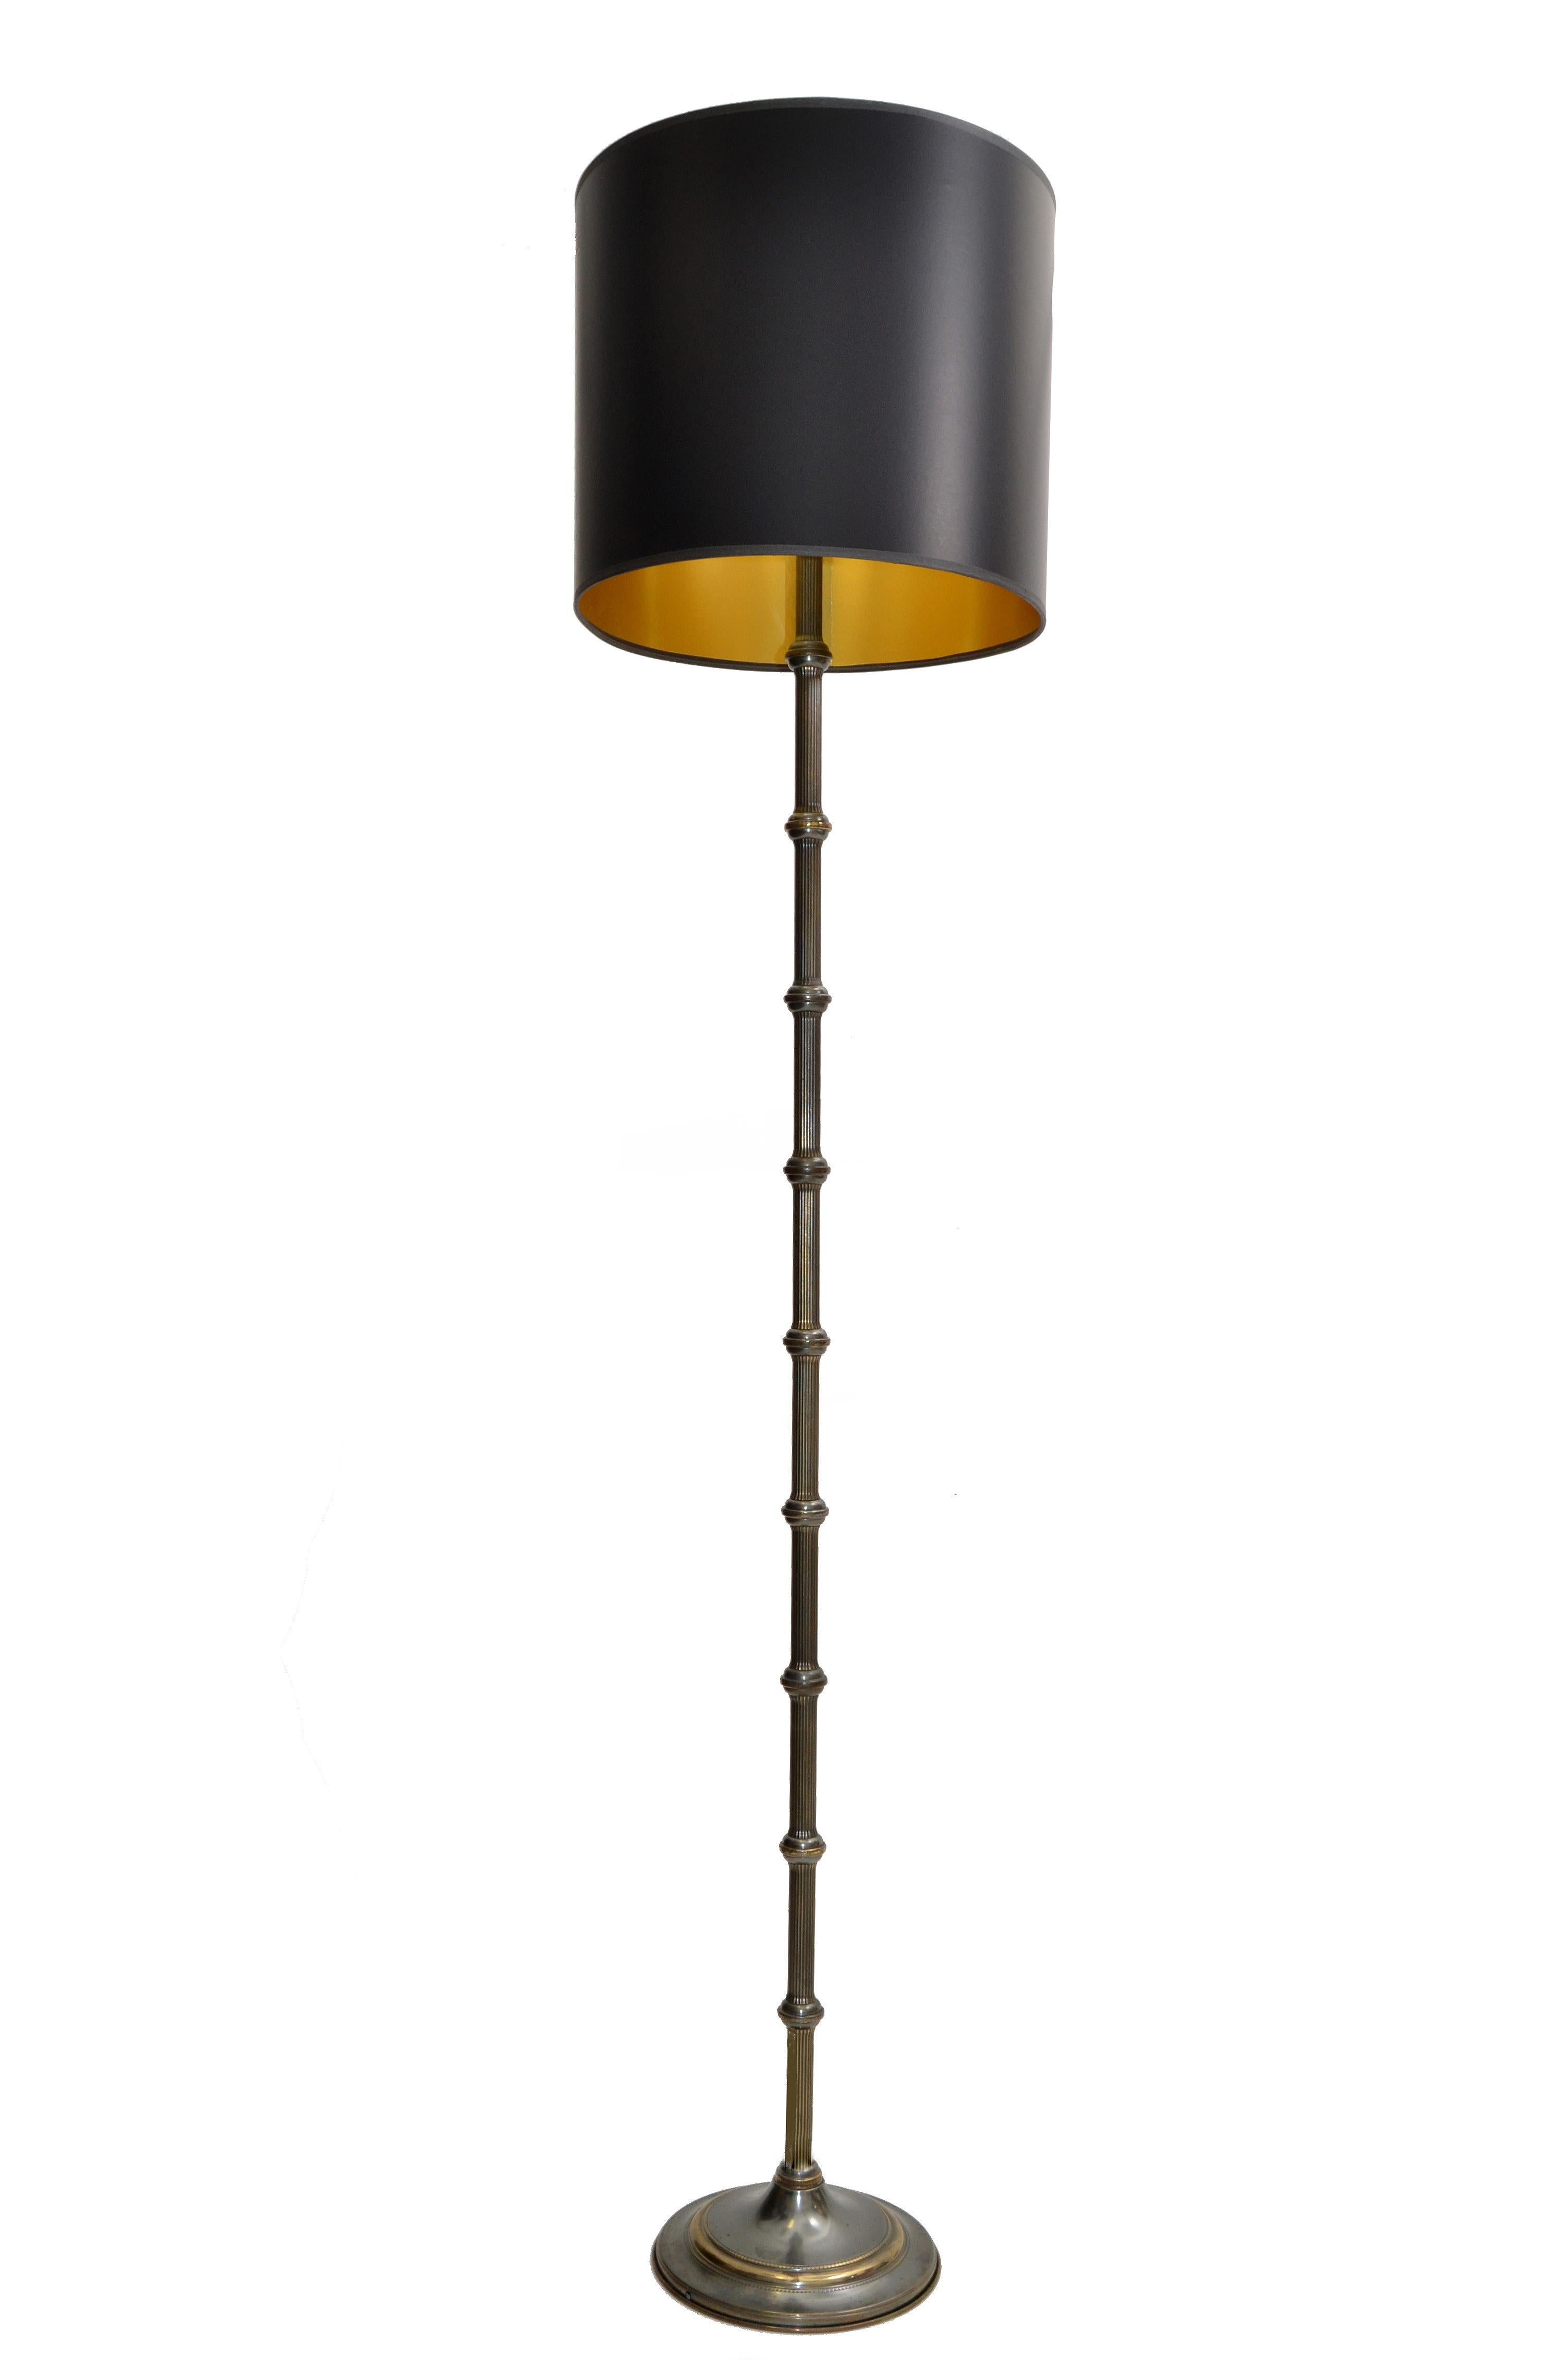 Original French Mid-Century Modern silvered bronze & brass floor lamp by Maison Jansen made in France 1950.
Perfect working condition and takes one regular Light bulb.
Sold with custom made black and gold drum paper shade.
Measurement Shade: